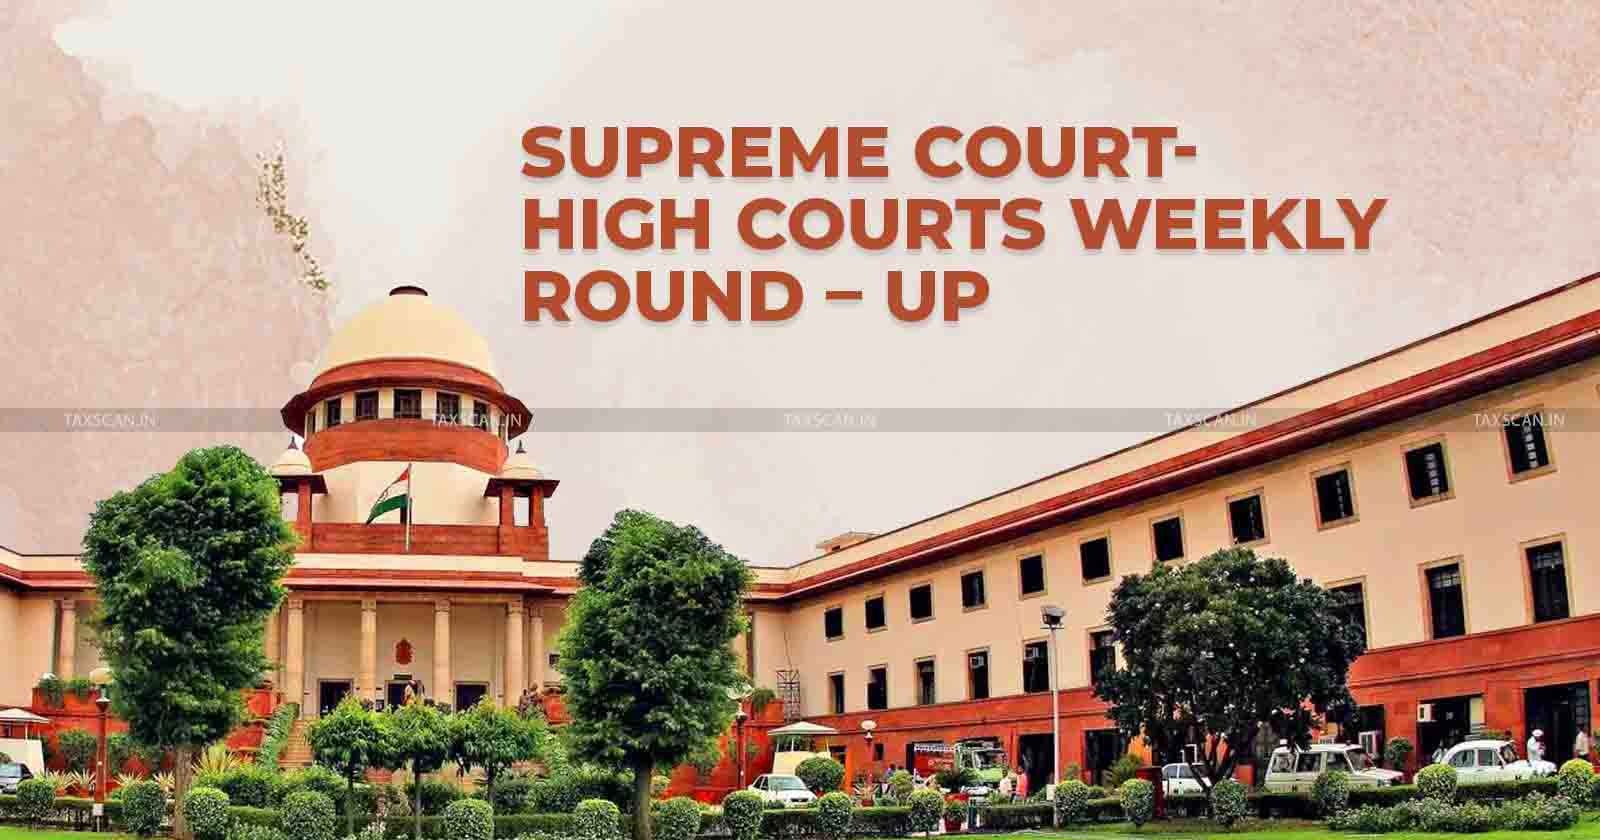 Supreme Court and High Courts Weekly Round Up - Supreme Court weekly round up - High court weekly round up - TAXSCAN